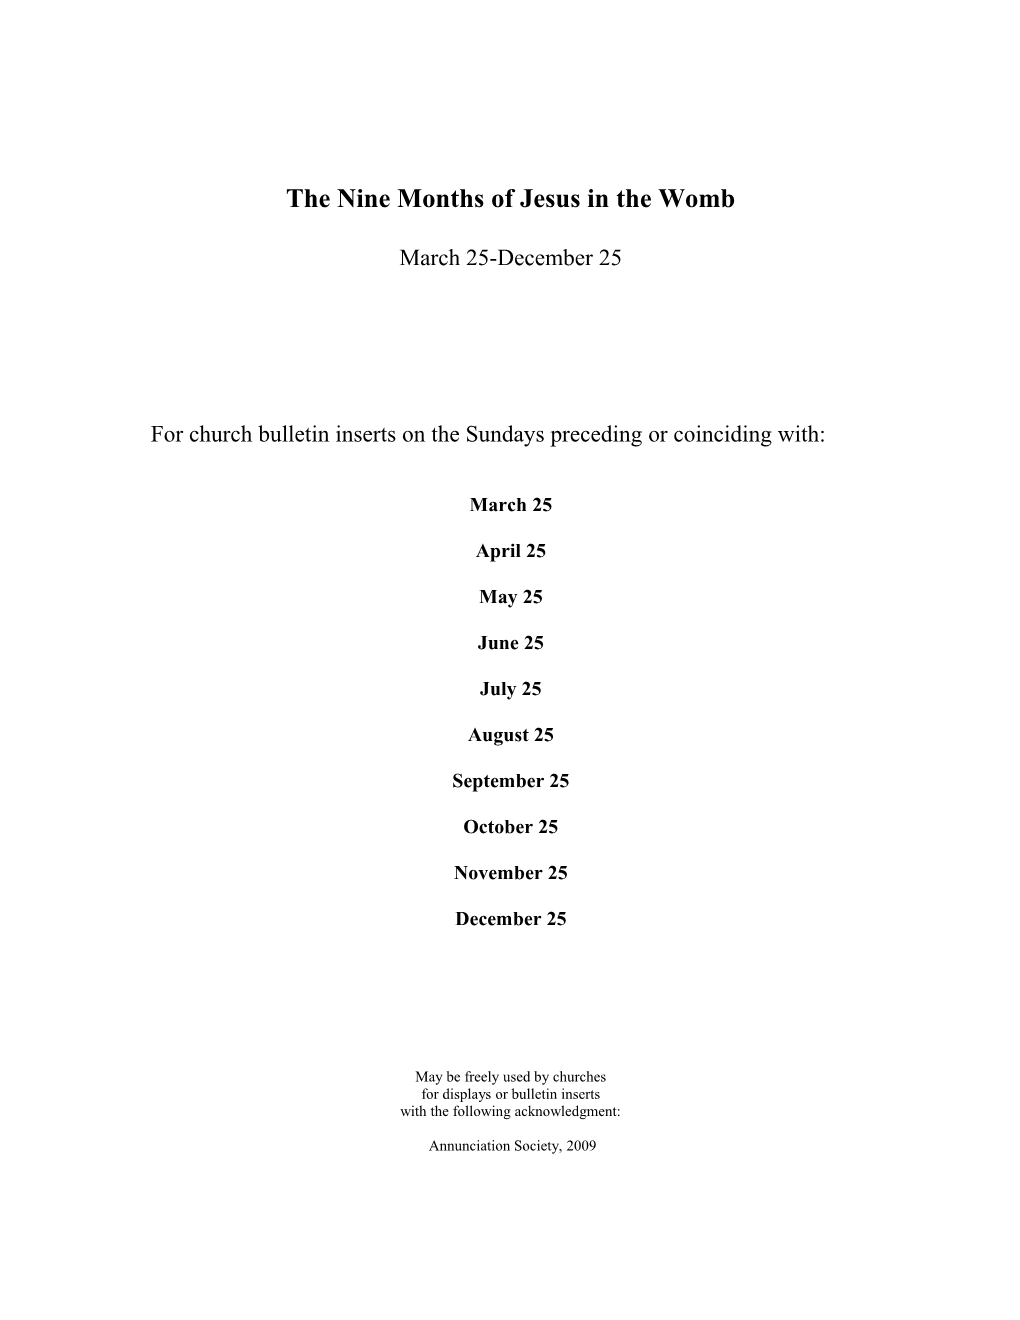 The Nine Months of Jesus in the Womb